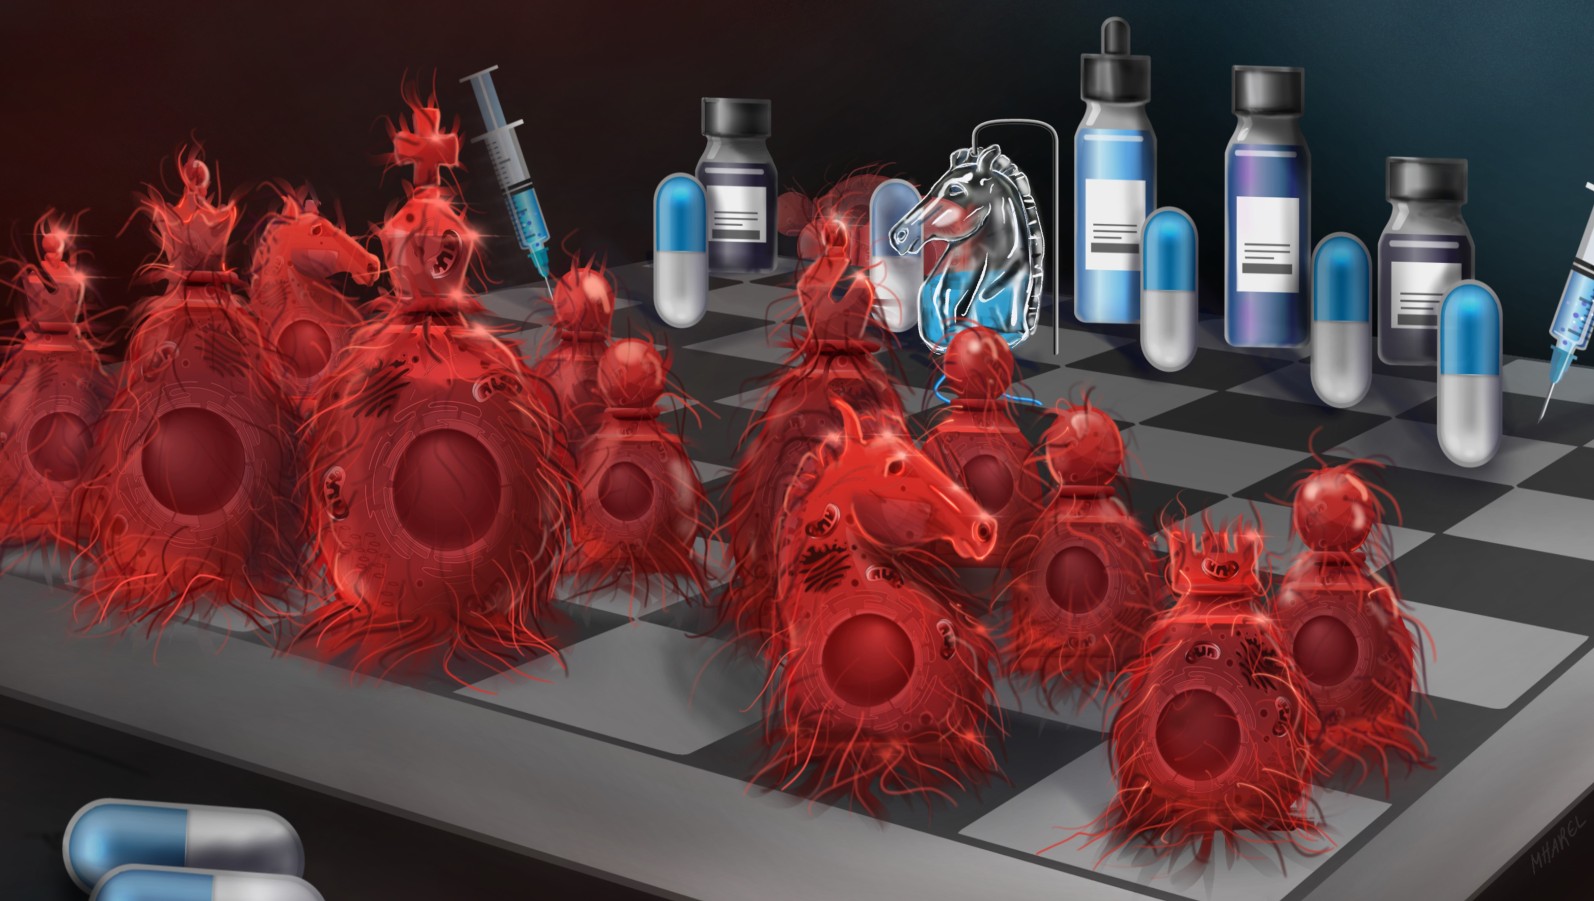 Conceptual illustration of the chess battle between cancer cells and anti-cancer drugs. Credit: Maayan Visuals